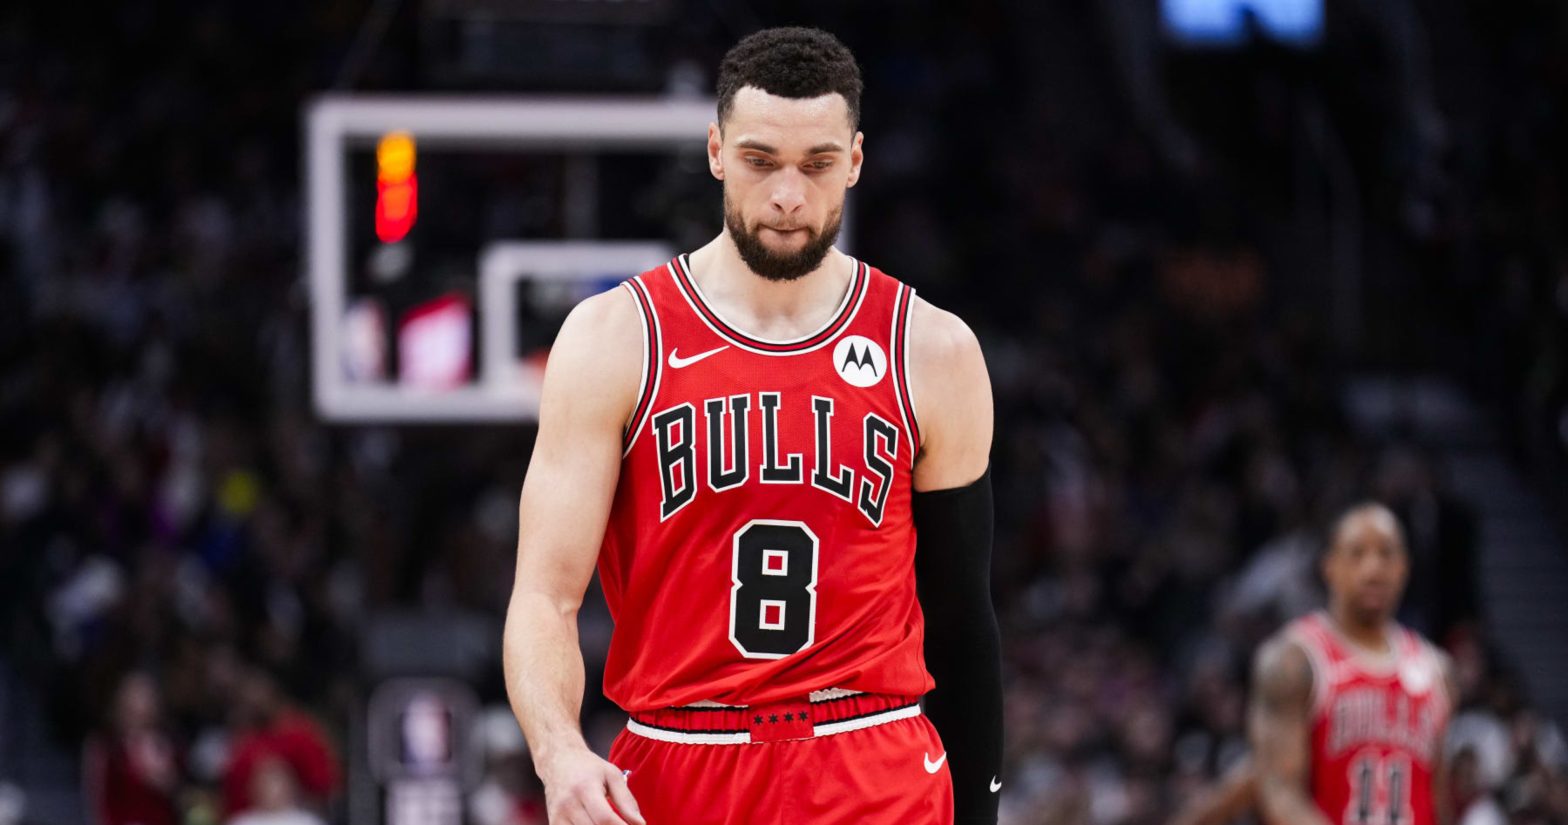 Bulls Rumors: Zach LaVine Trade May Require CHI Adding ‘Another Asset’ to Move Star